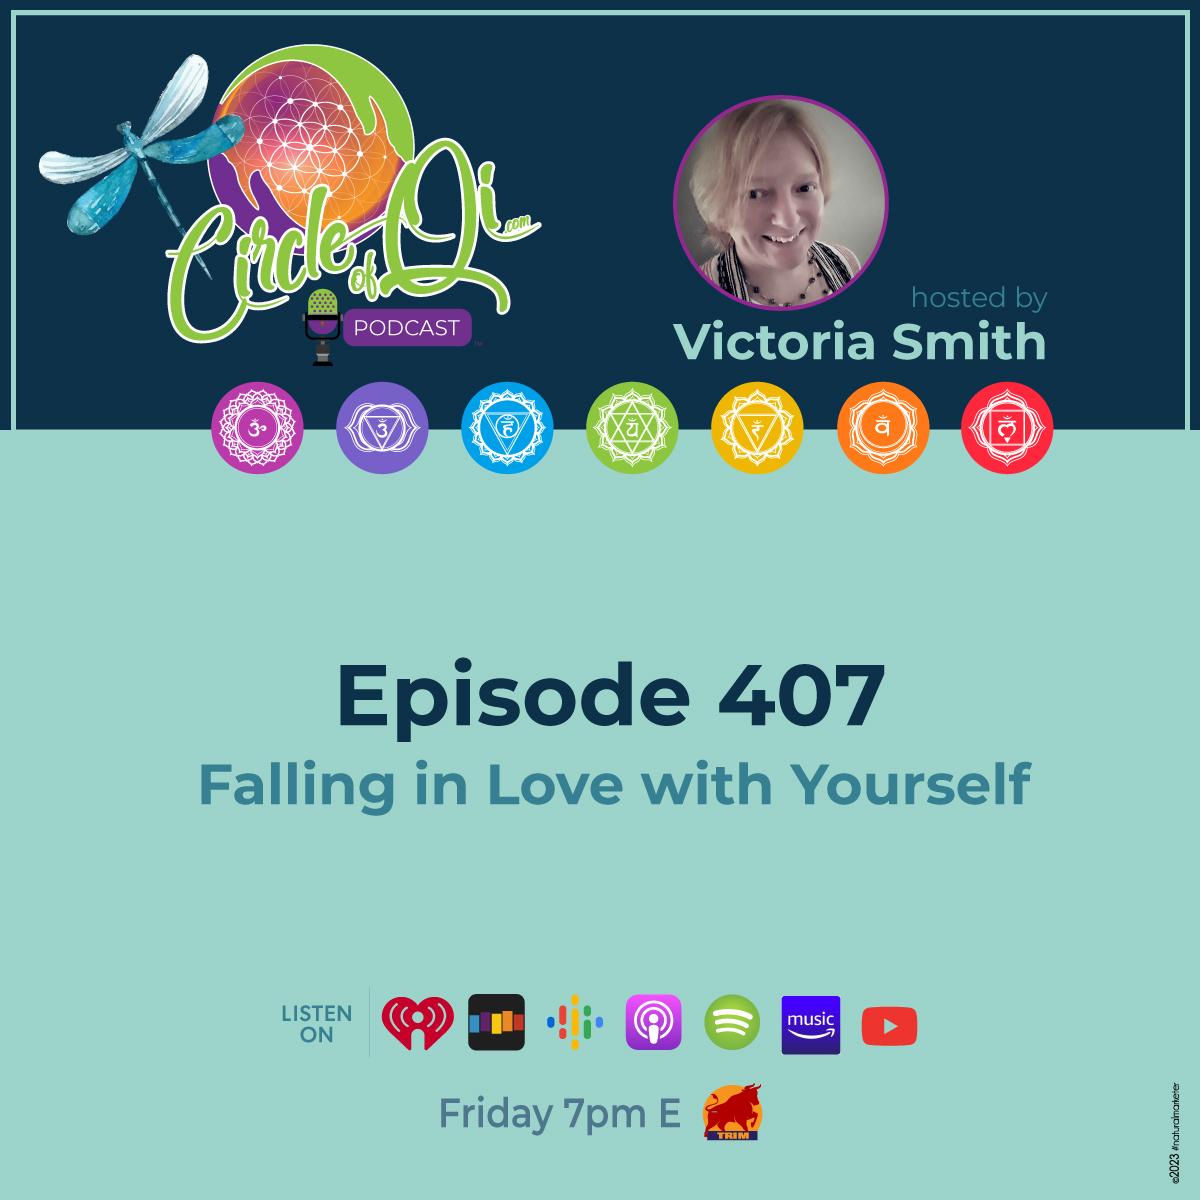 Episode 407: Are you ready to fall in love with yourself again?